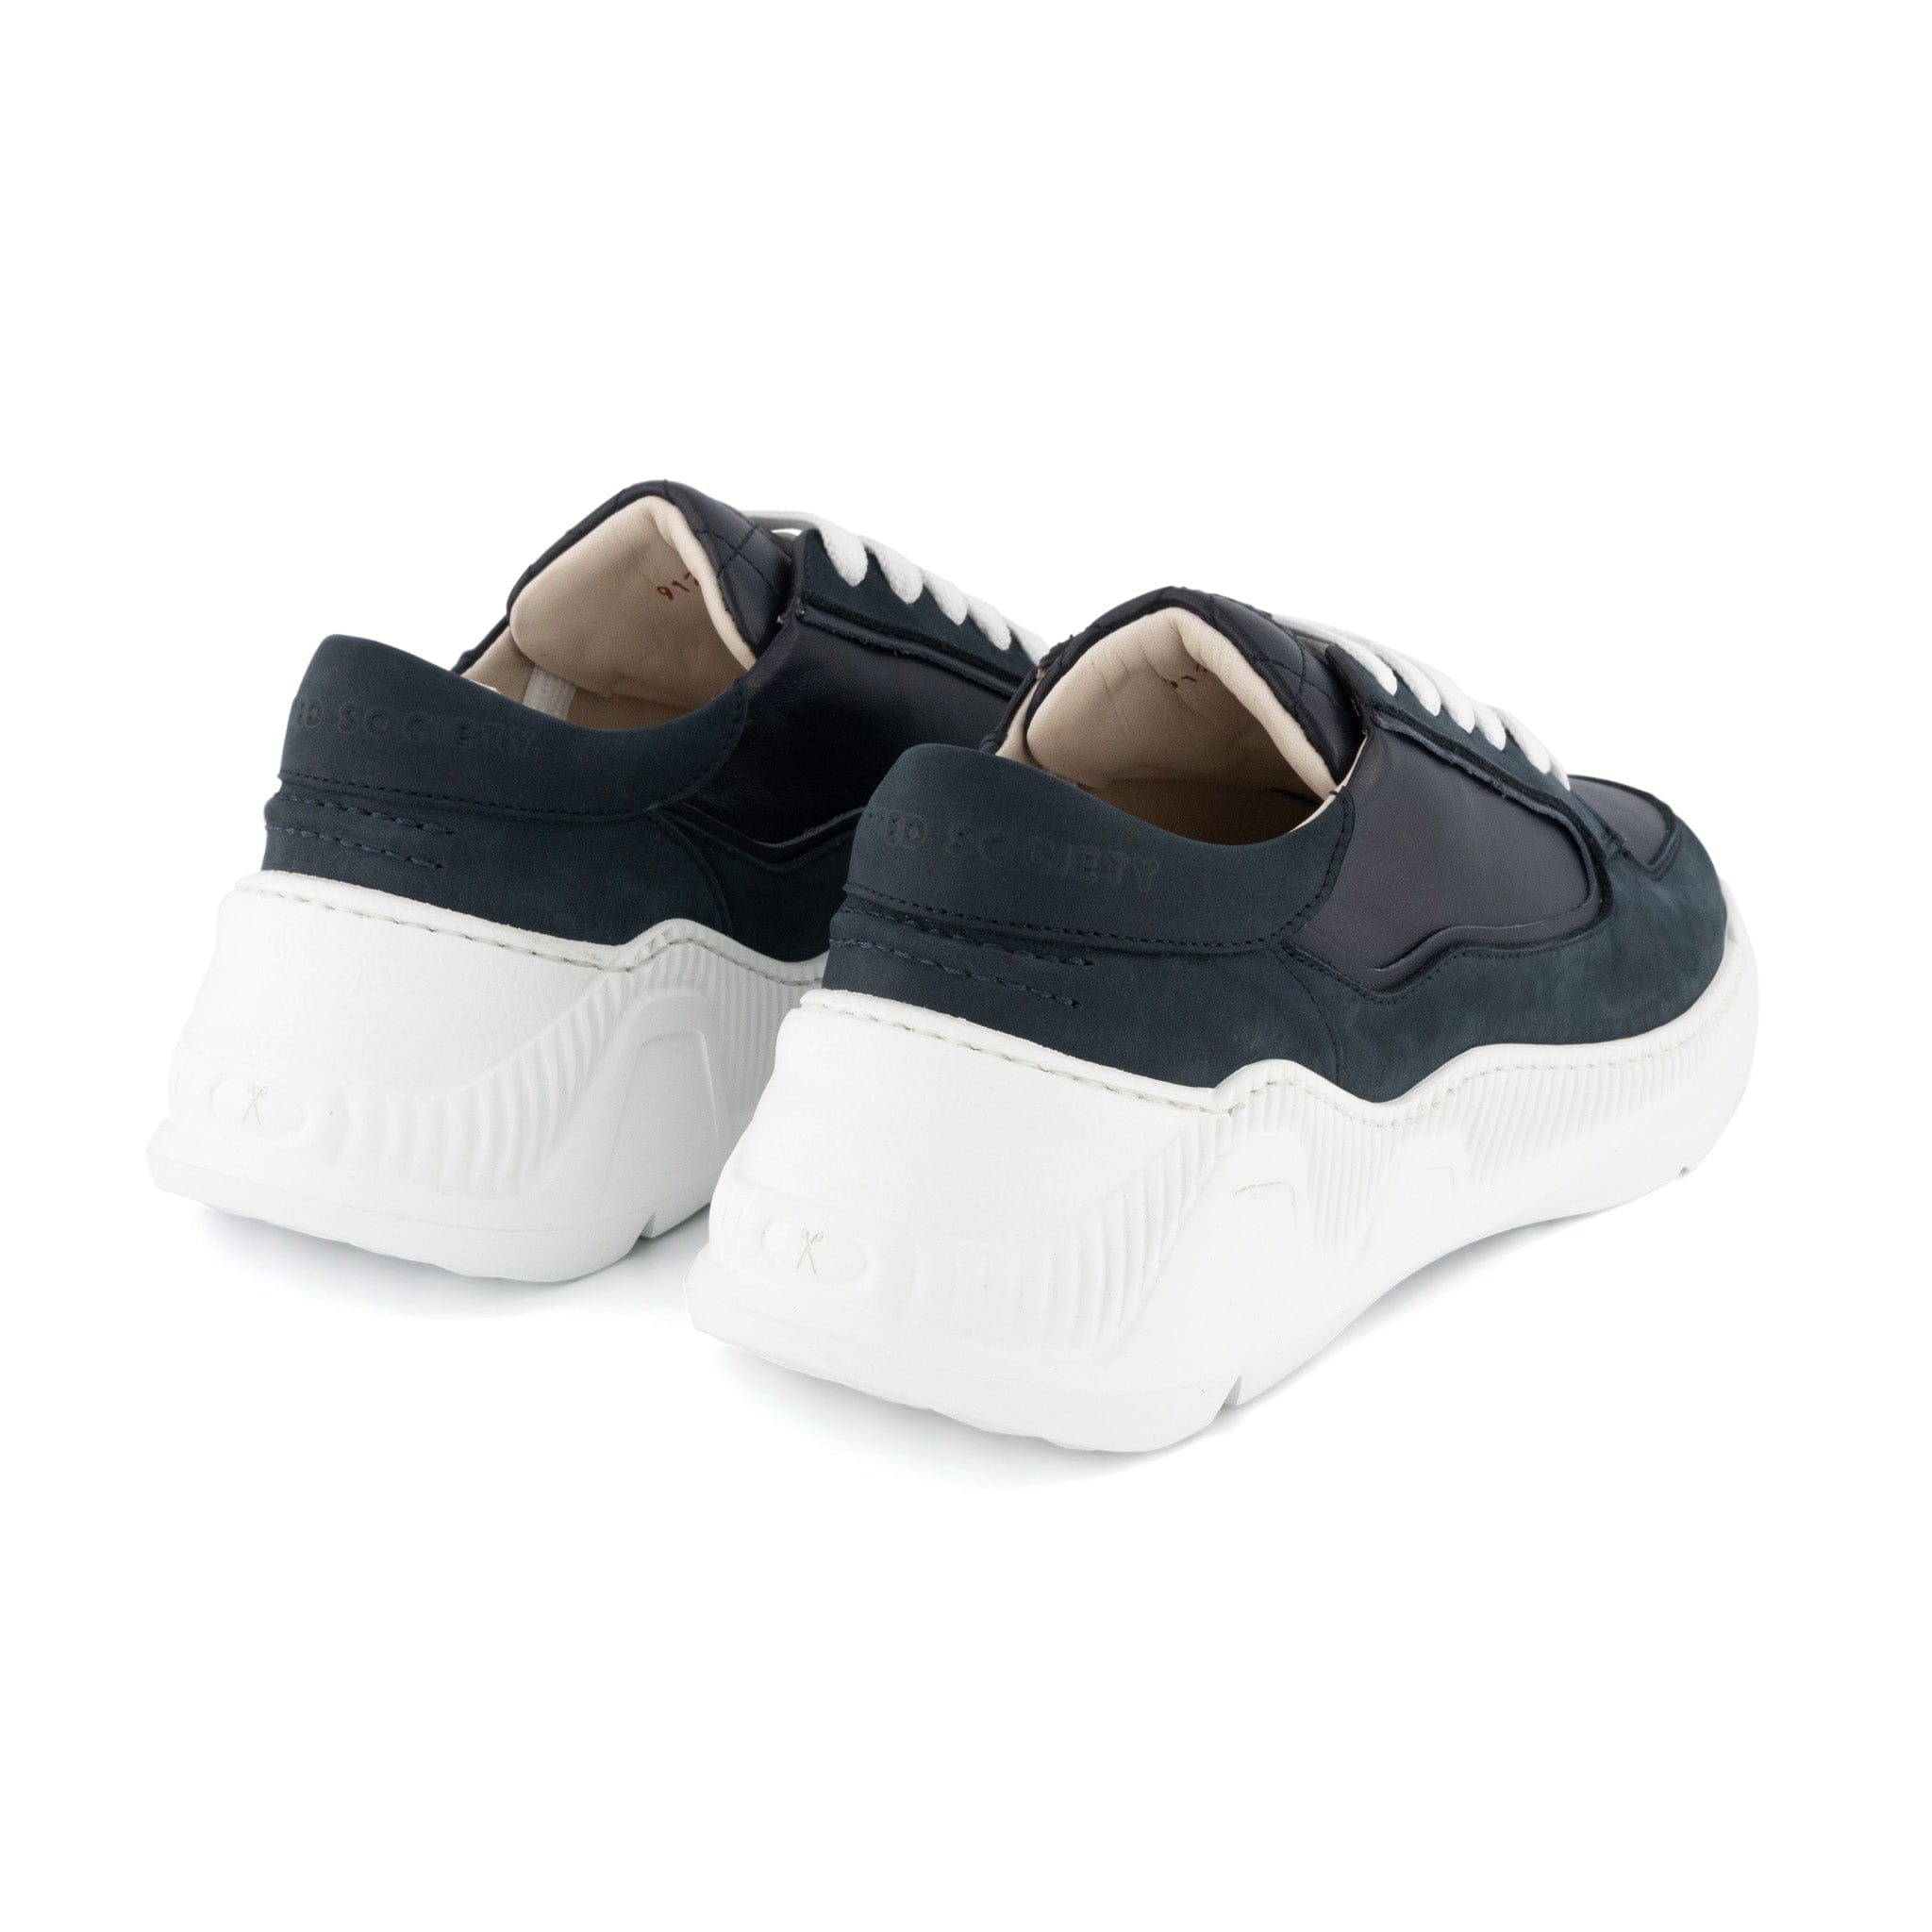 Nesto Low Top Italian Leather Sneaker - All Navy | White Outsole | Made in Italy